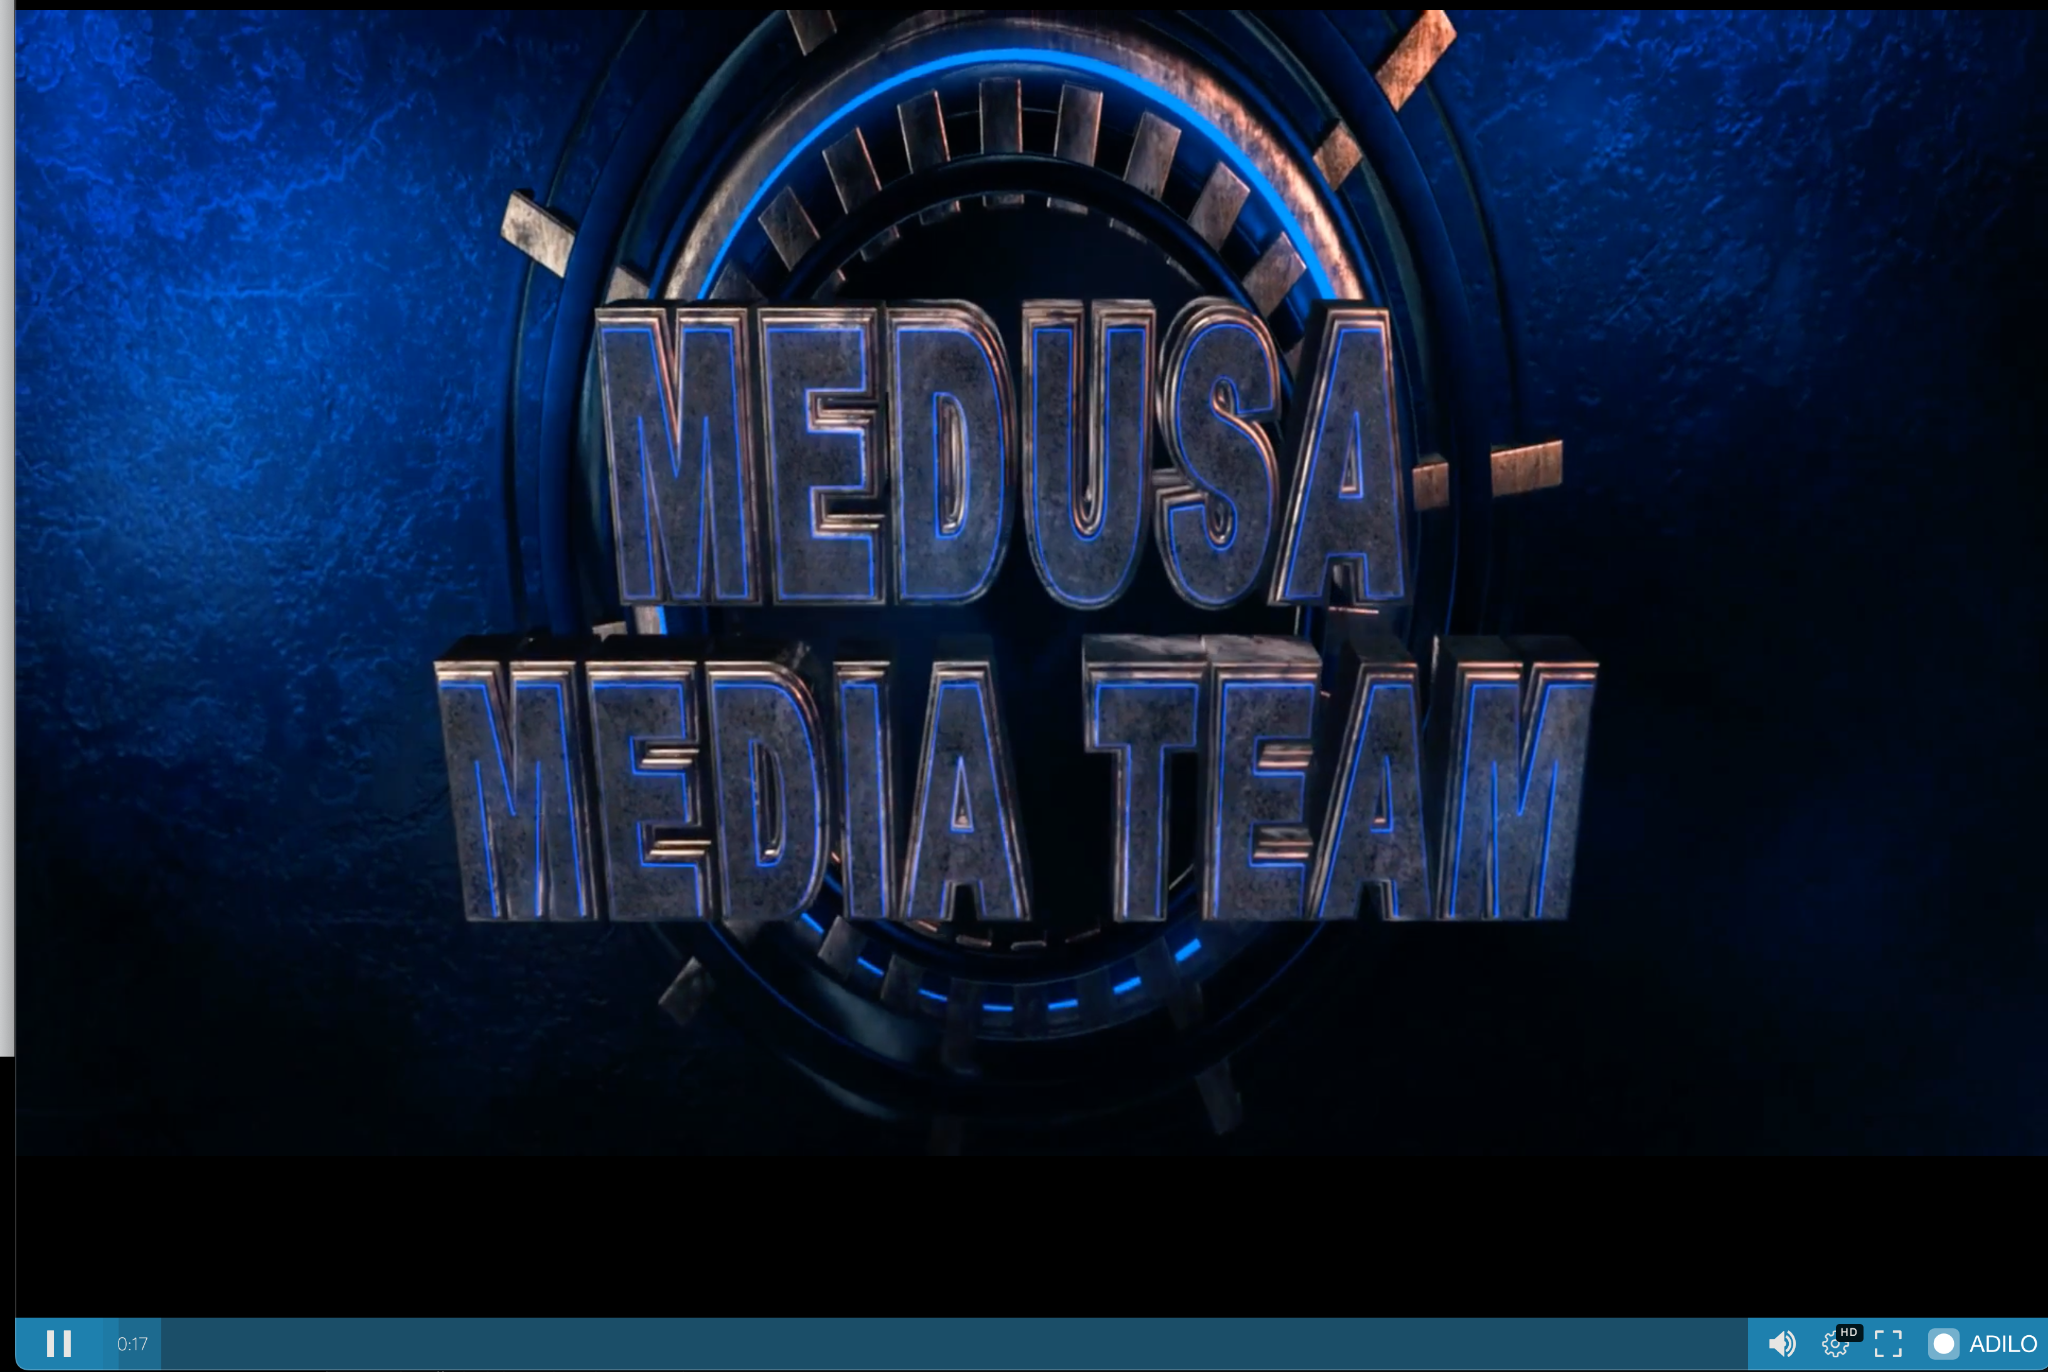 Image 3 is a screenshot of a Medusa Media Team video. Capital text against what looks to be a ship’s wheel. 